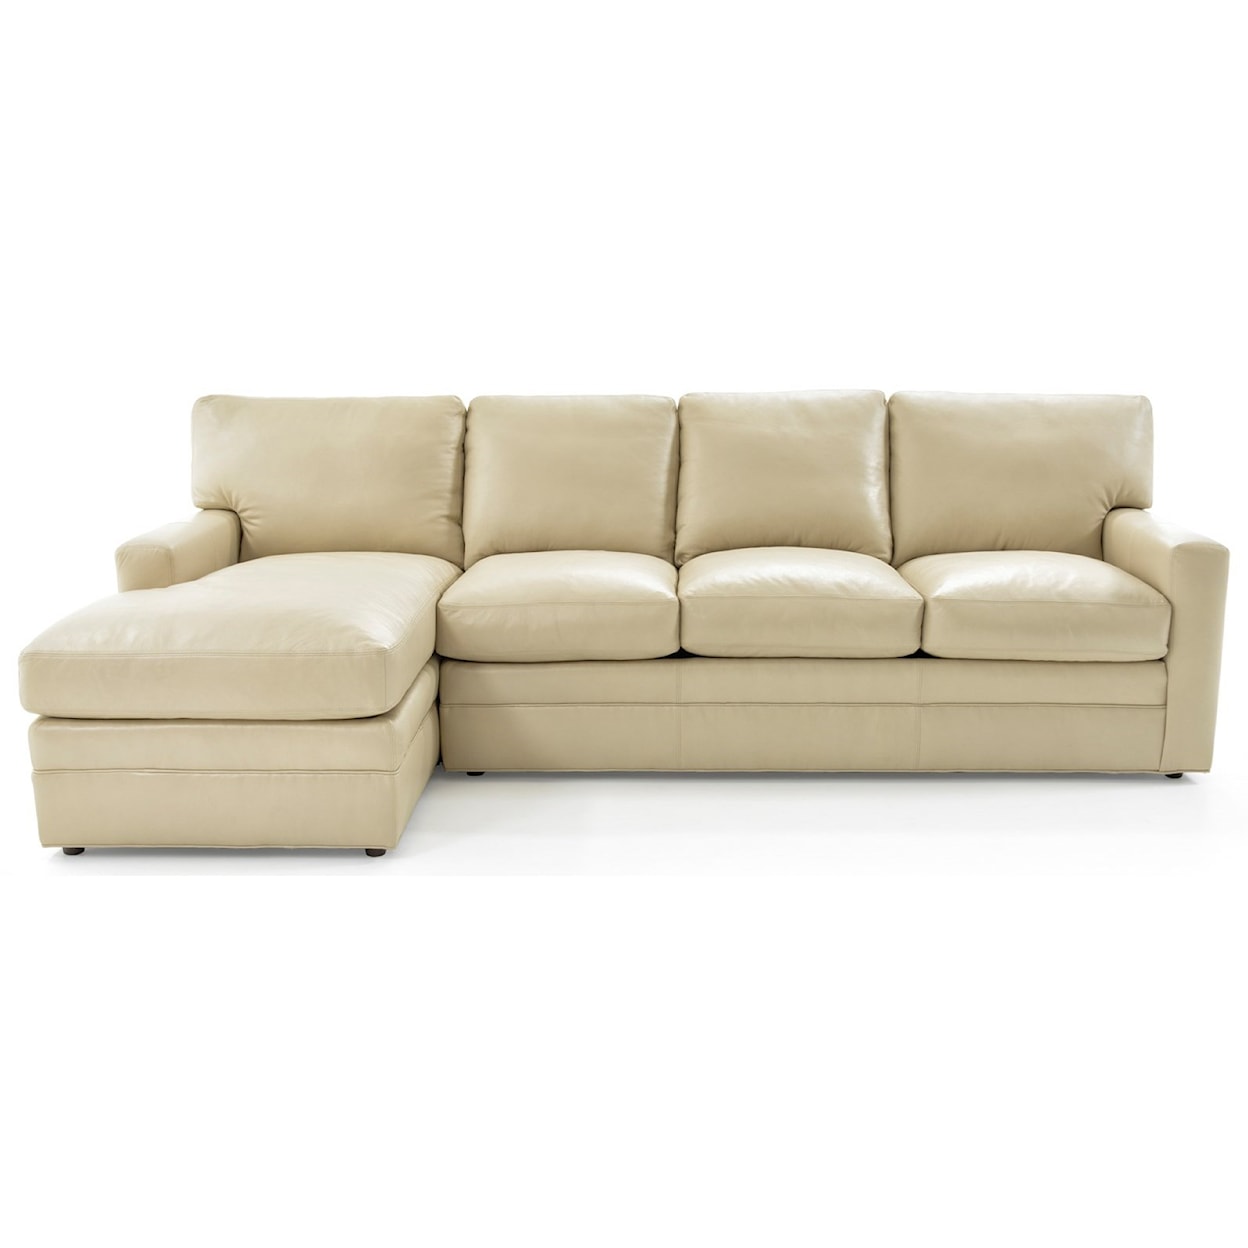 Whittemore-Sherrill 442 2 Pc L-Shape Sectional Sofa w/ LAF Chaise